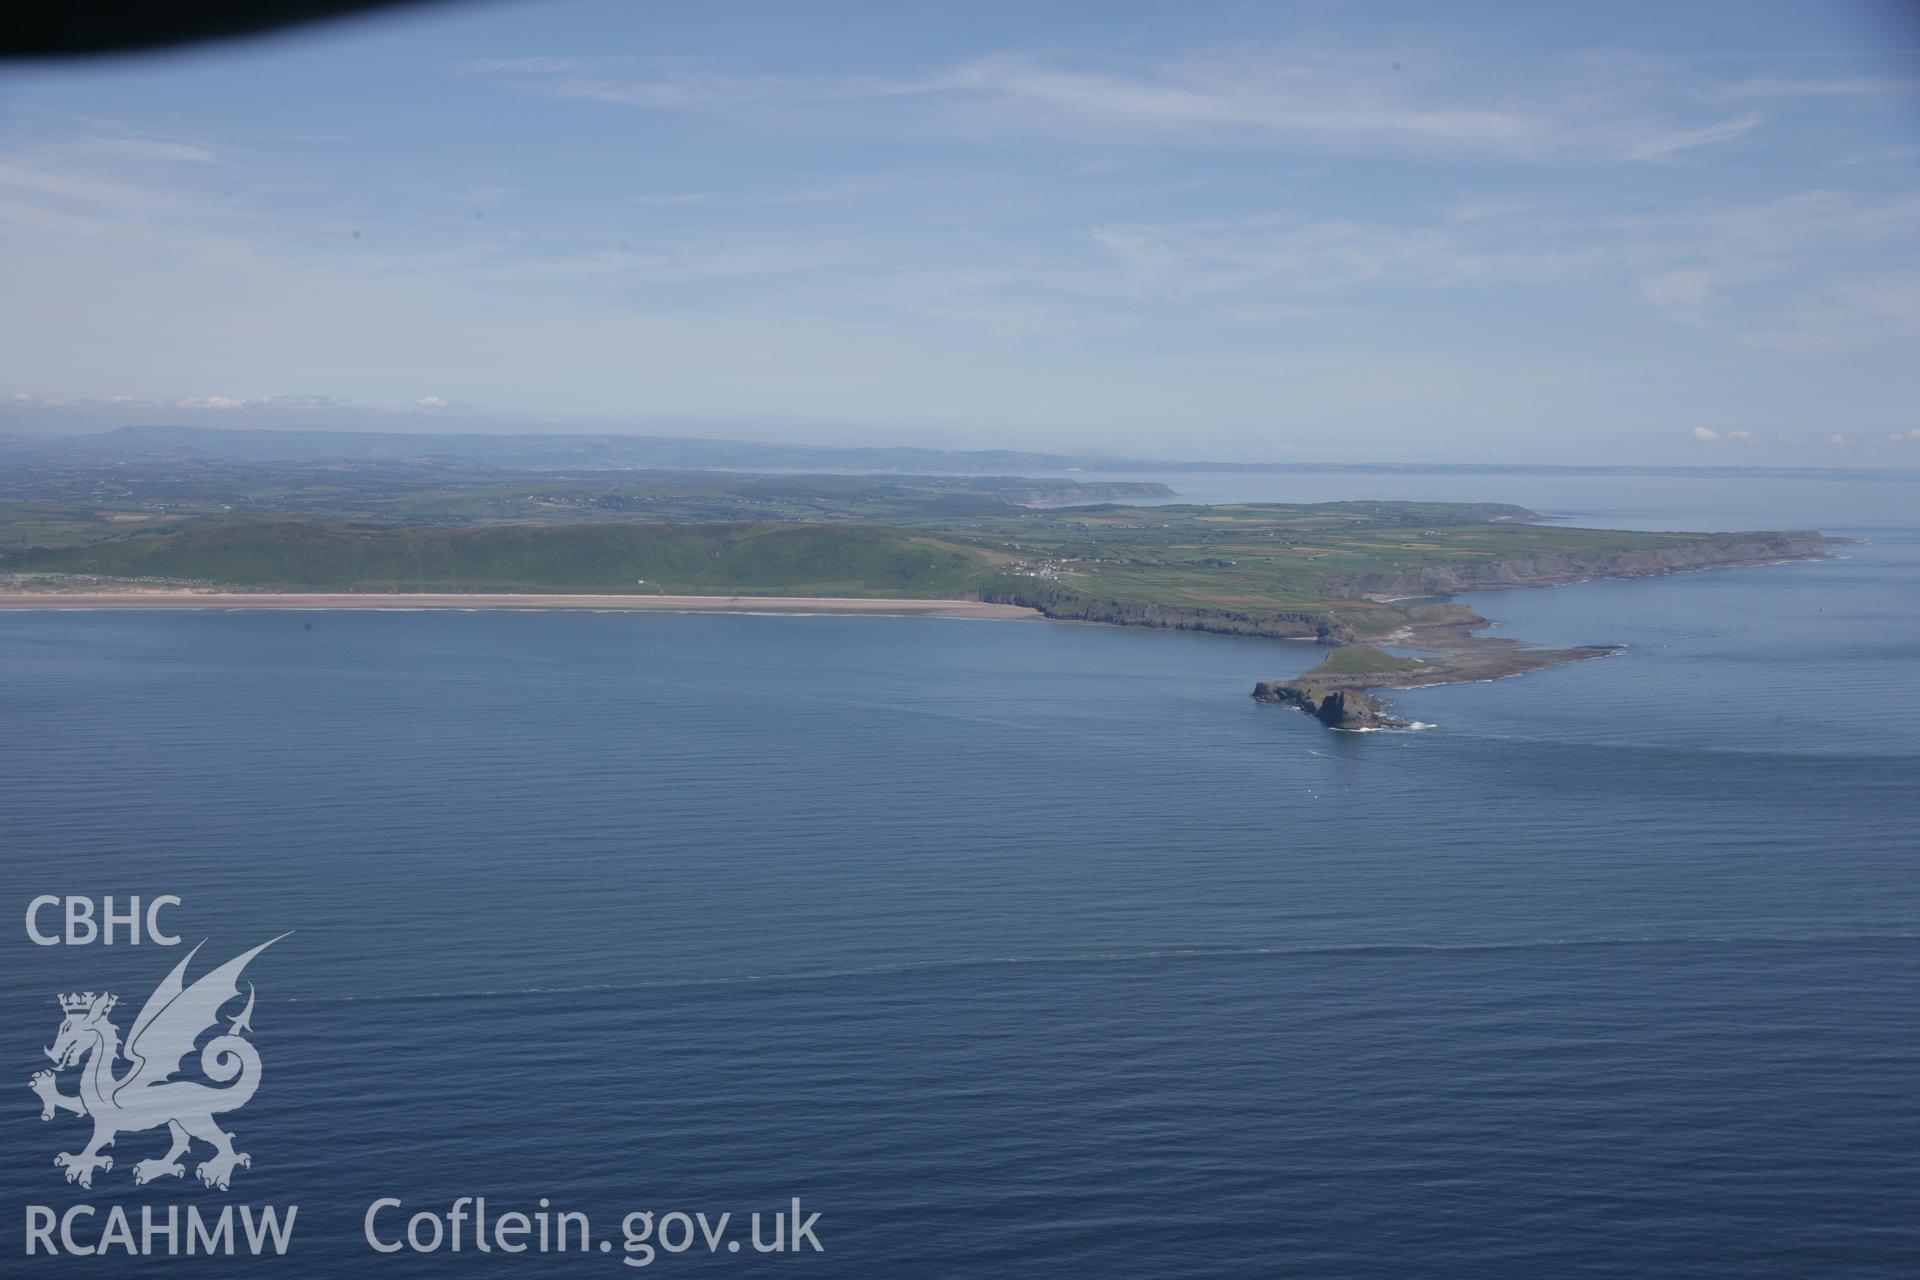 RCAHMW colour oblique aerial photograph of Worms Head Enclosure from the west. A wide landscape view also showing Rhossili Bay. Taken on 22 June 2005 by Toby Driver